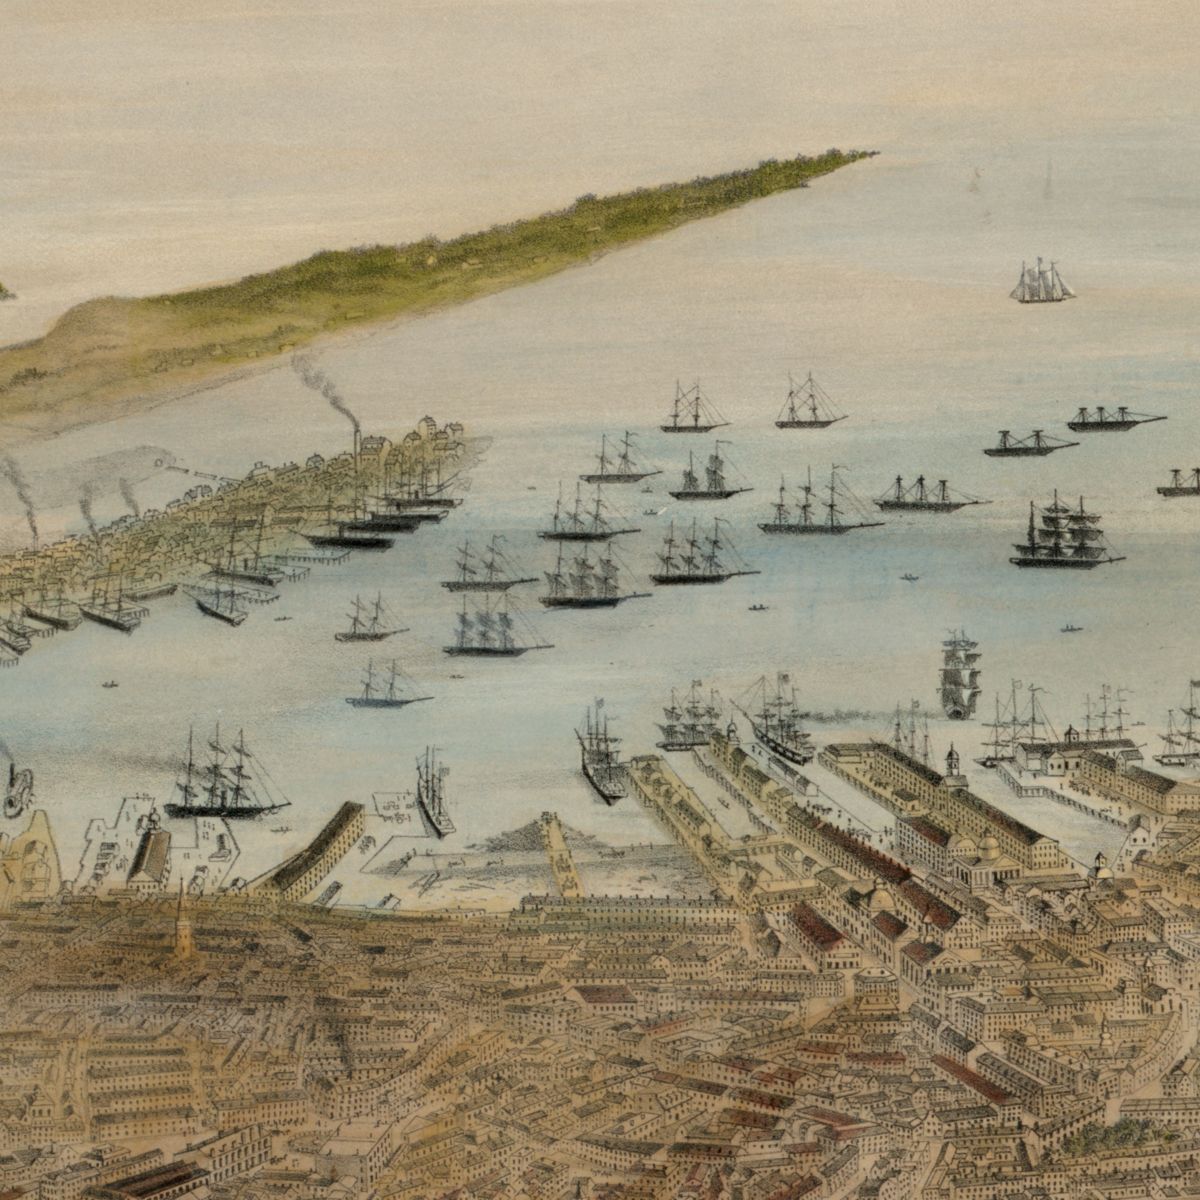 Illustration of ships in Boston Harbor from a birds-eye view